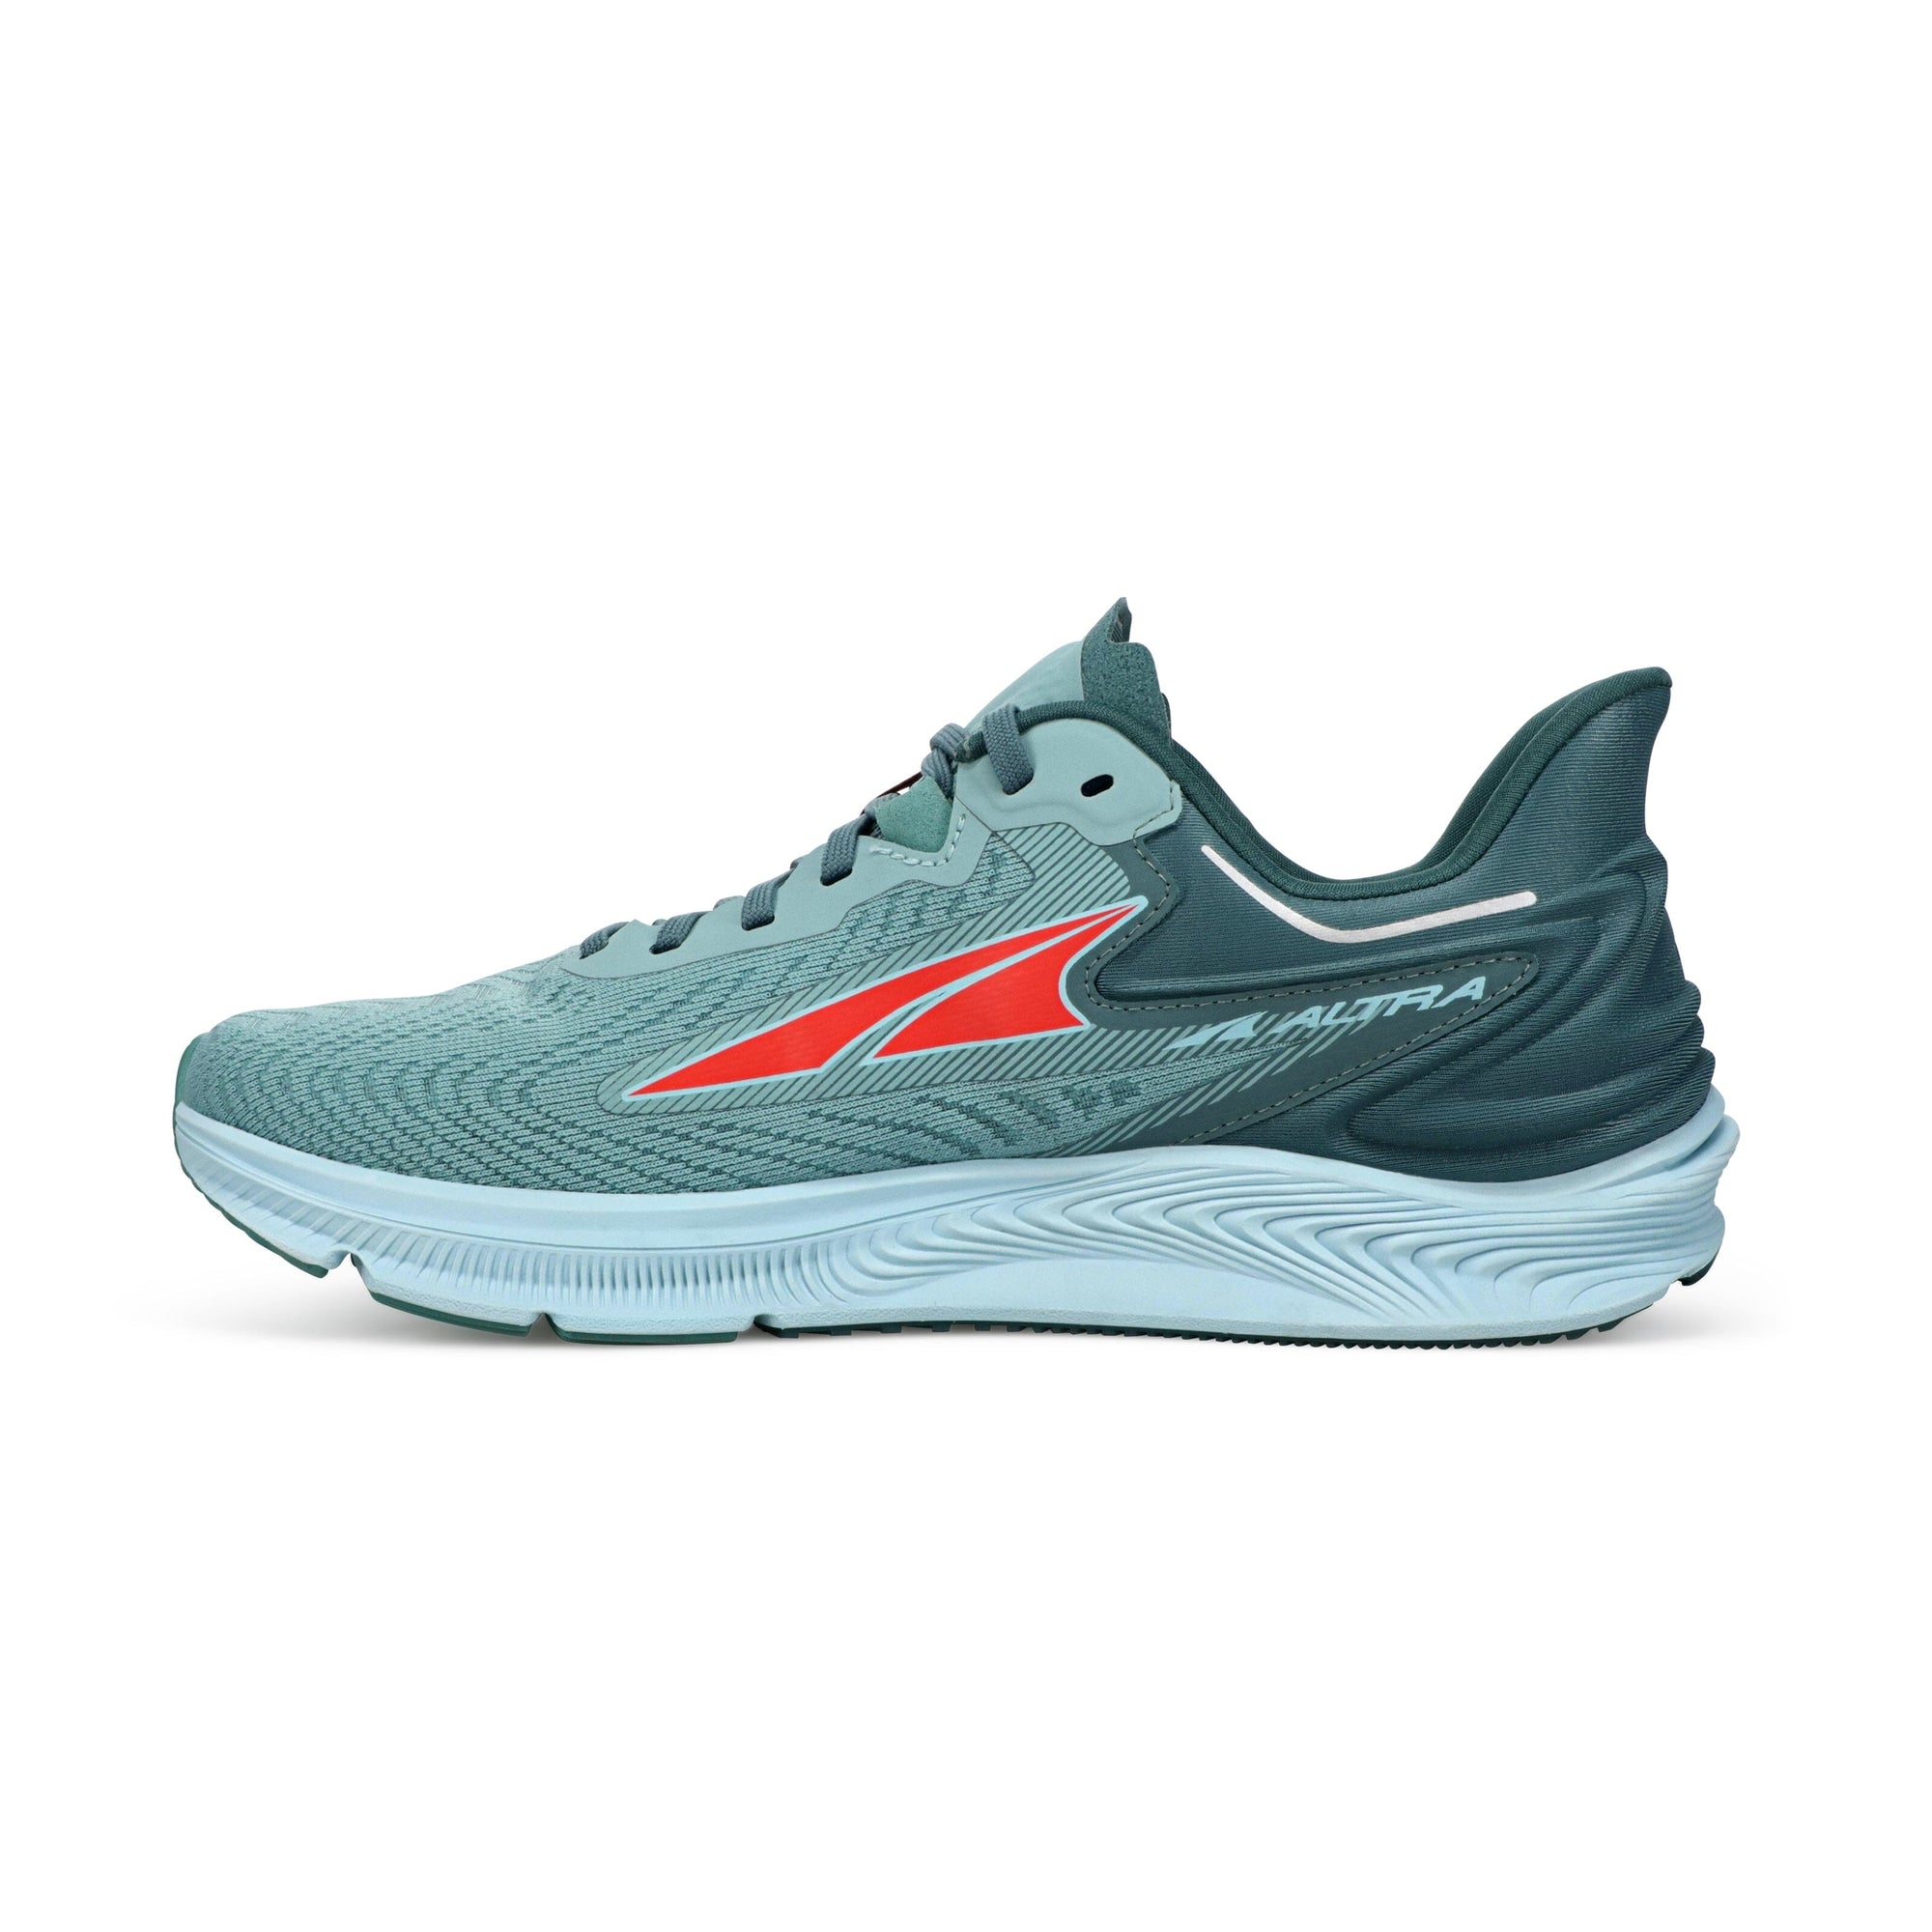 Altra Women's Torin 6 Road Running Shoes Dusty Teal US 5.5 | EUR 36 | UK 3.5 